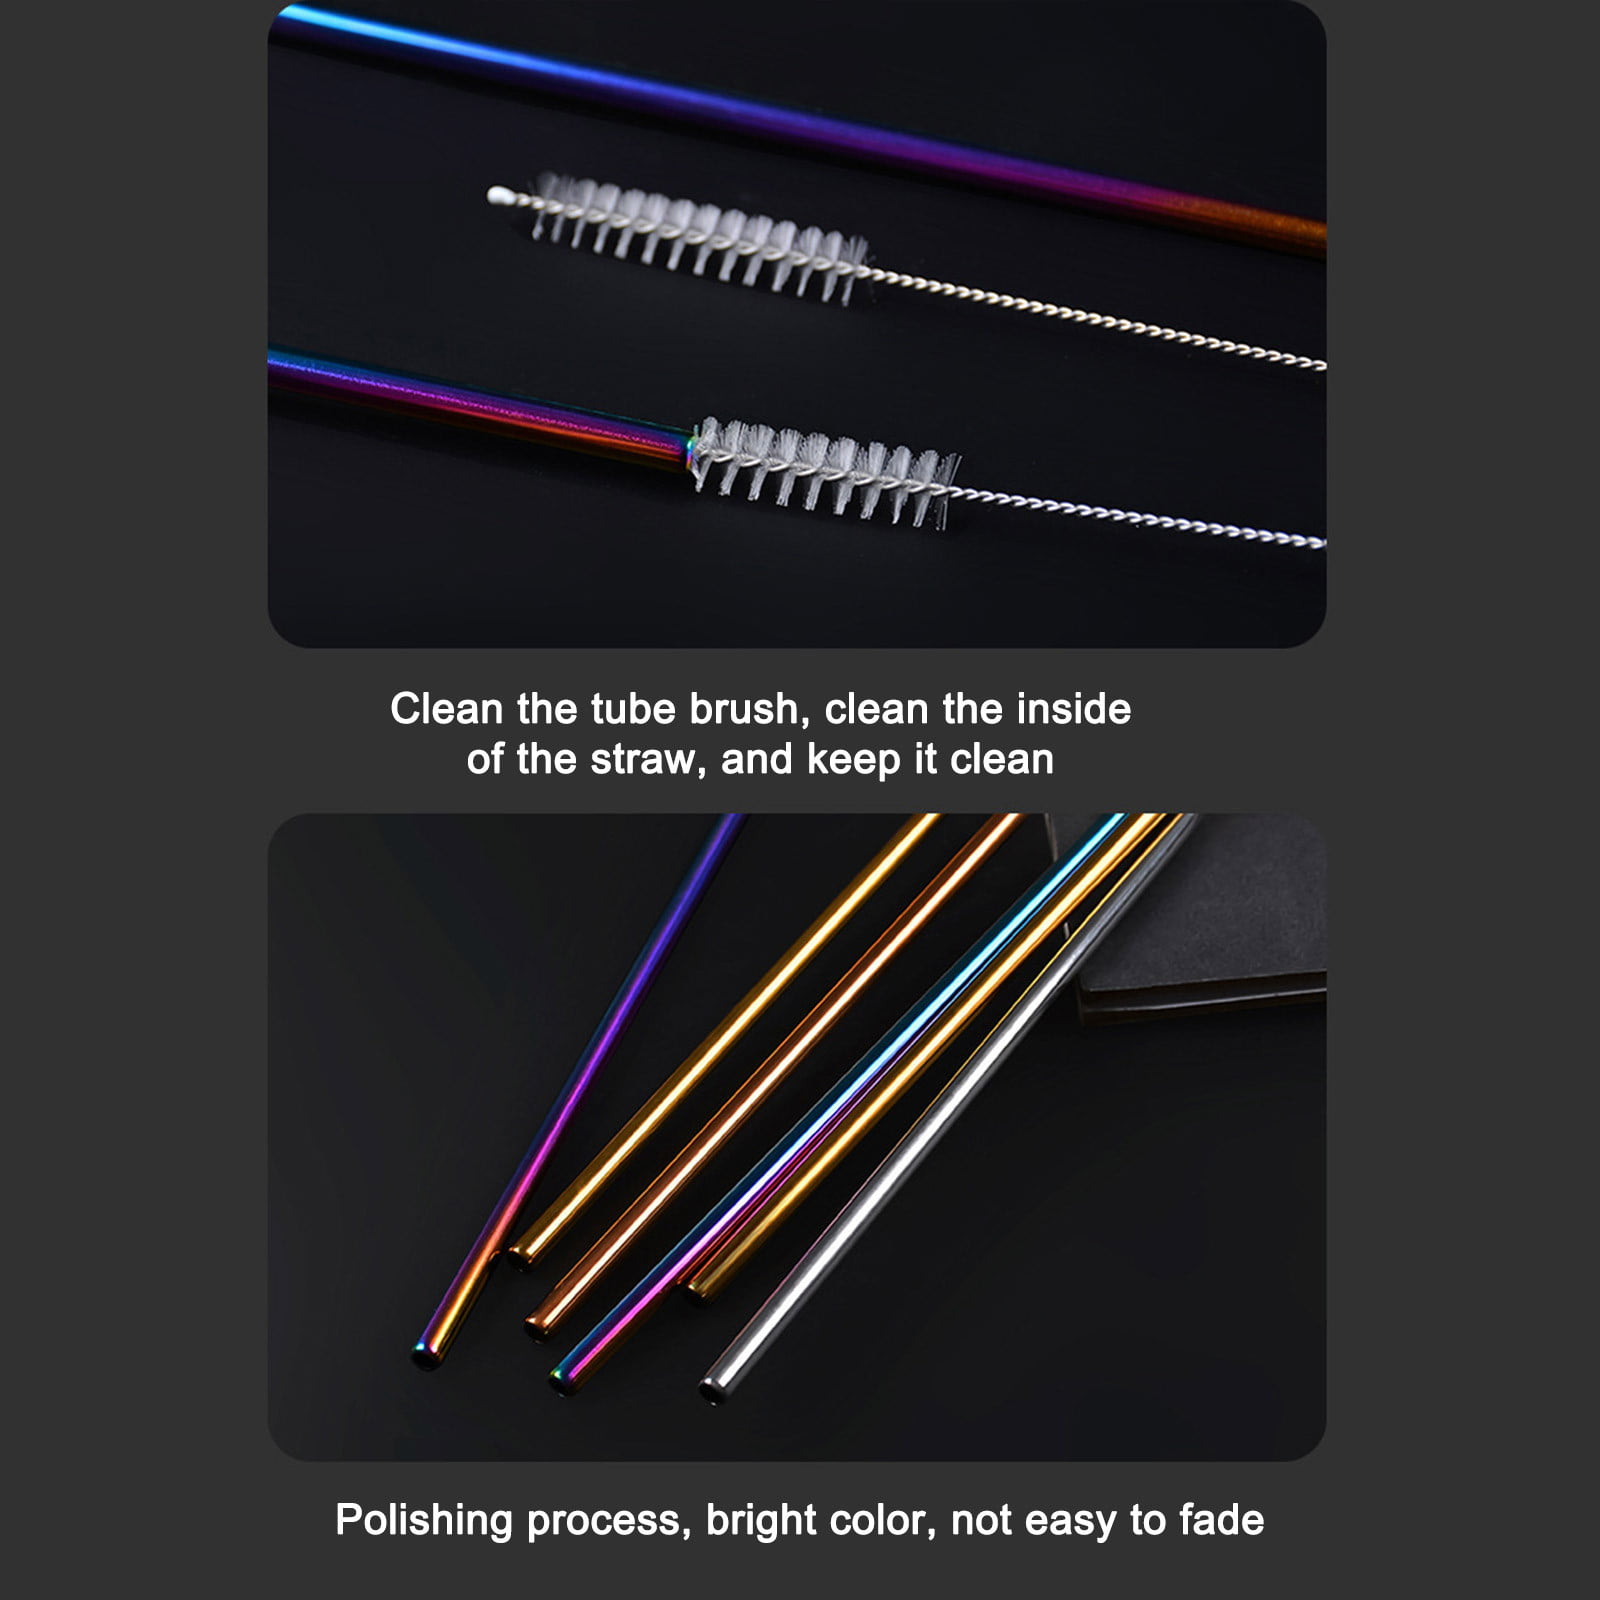 Anti Wrinkle Straw,Reusable No Wrinkle Straws Anti, Prevent Lip Wrinkles and Vertical Lip Lines from Long-Term Use of Straws Lip Wrinkle Stainless